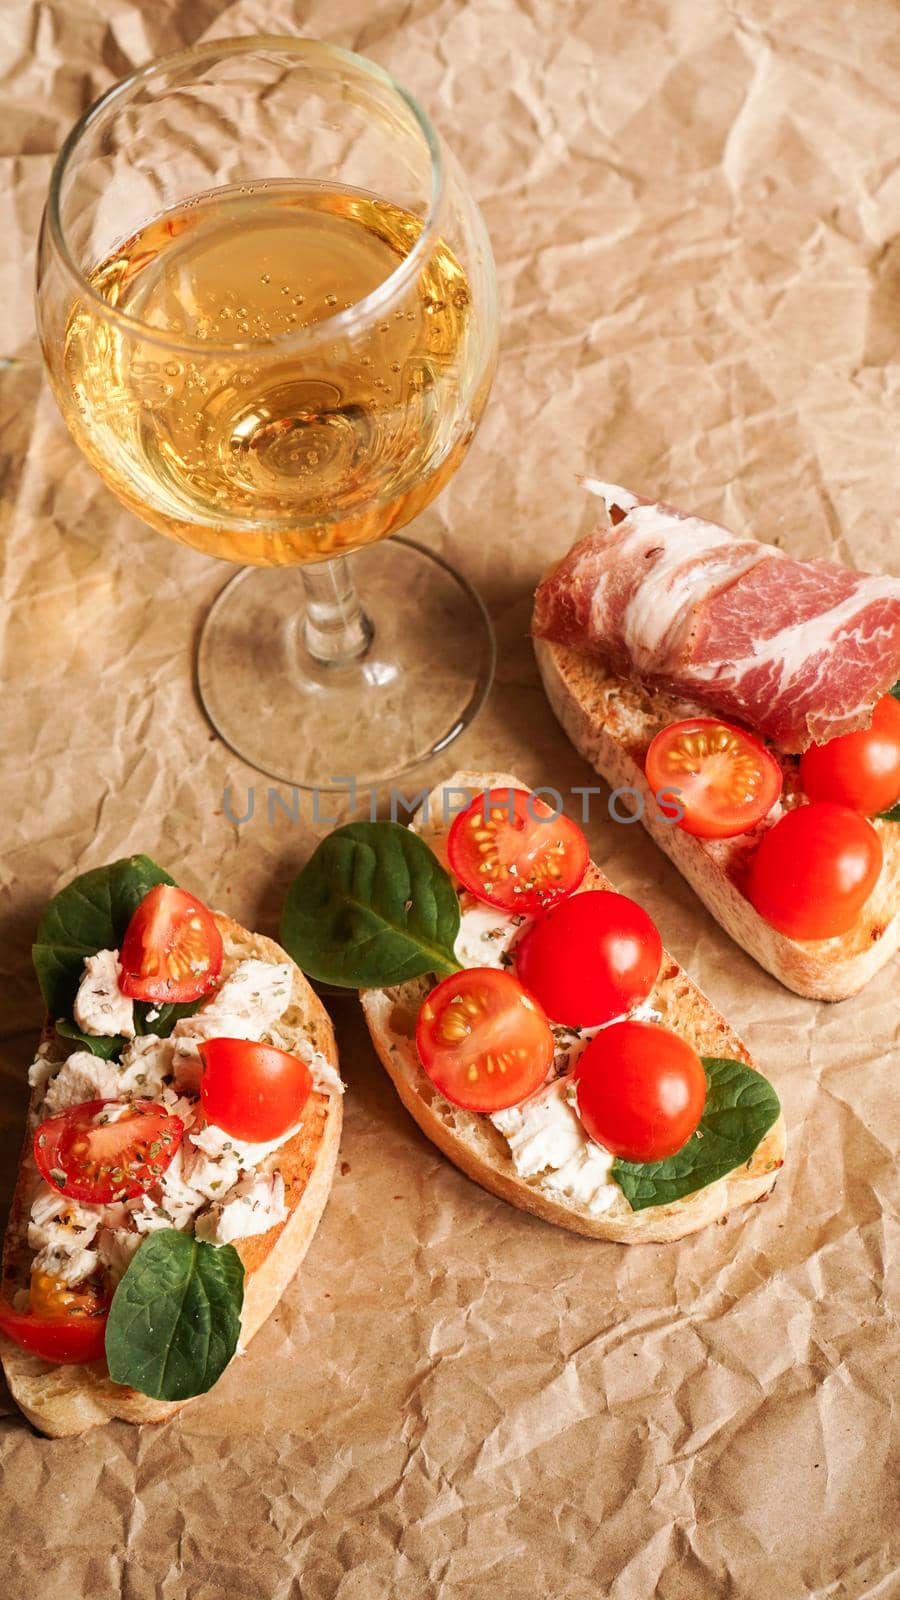 Bruschetta with cherry tomatoes. Wine glass, Italian appetizer. Craft paper background. Picnic concept